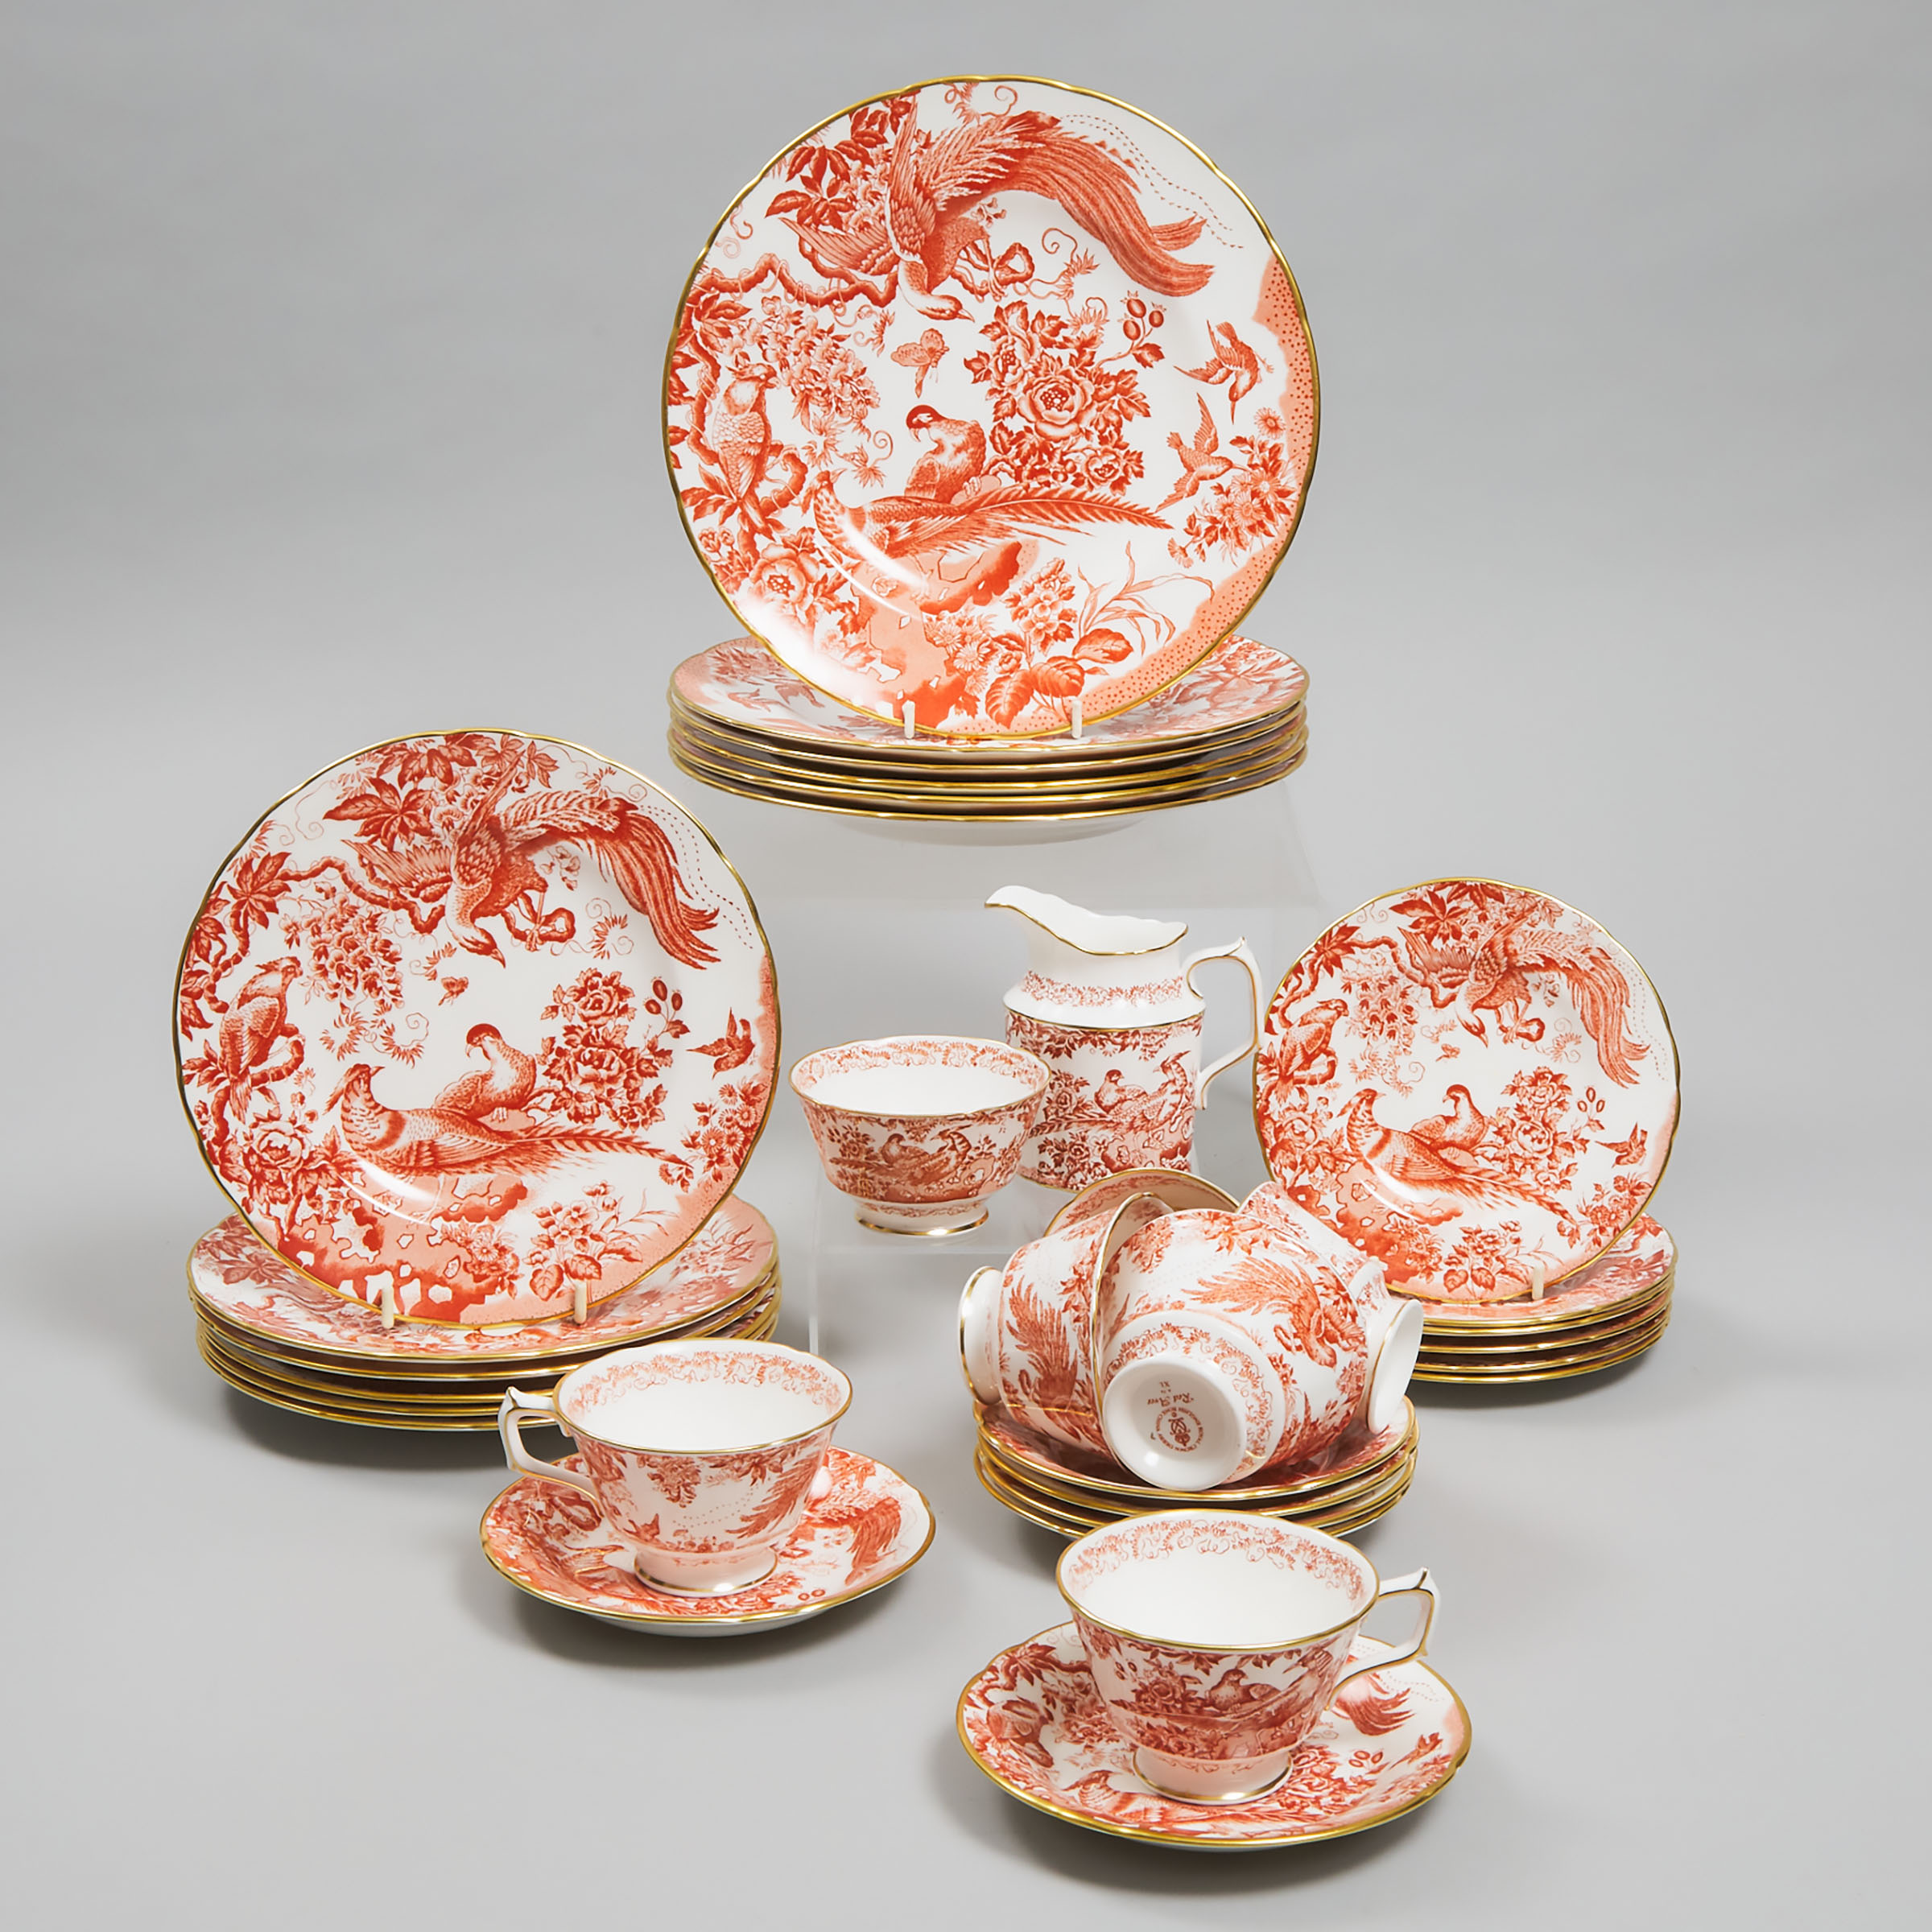 Royal Crown Derby 'Red Aves' Pattern Dinner Service, 20th century